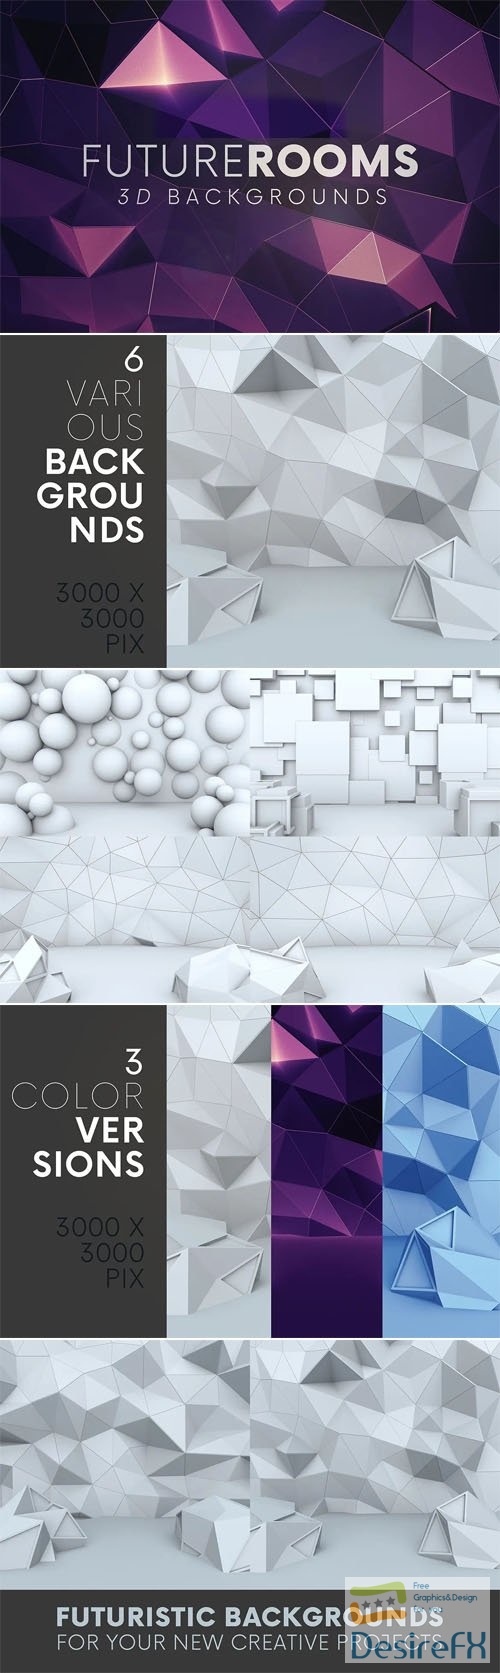 Futuristic Rooms 3D Backgrounds